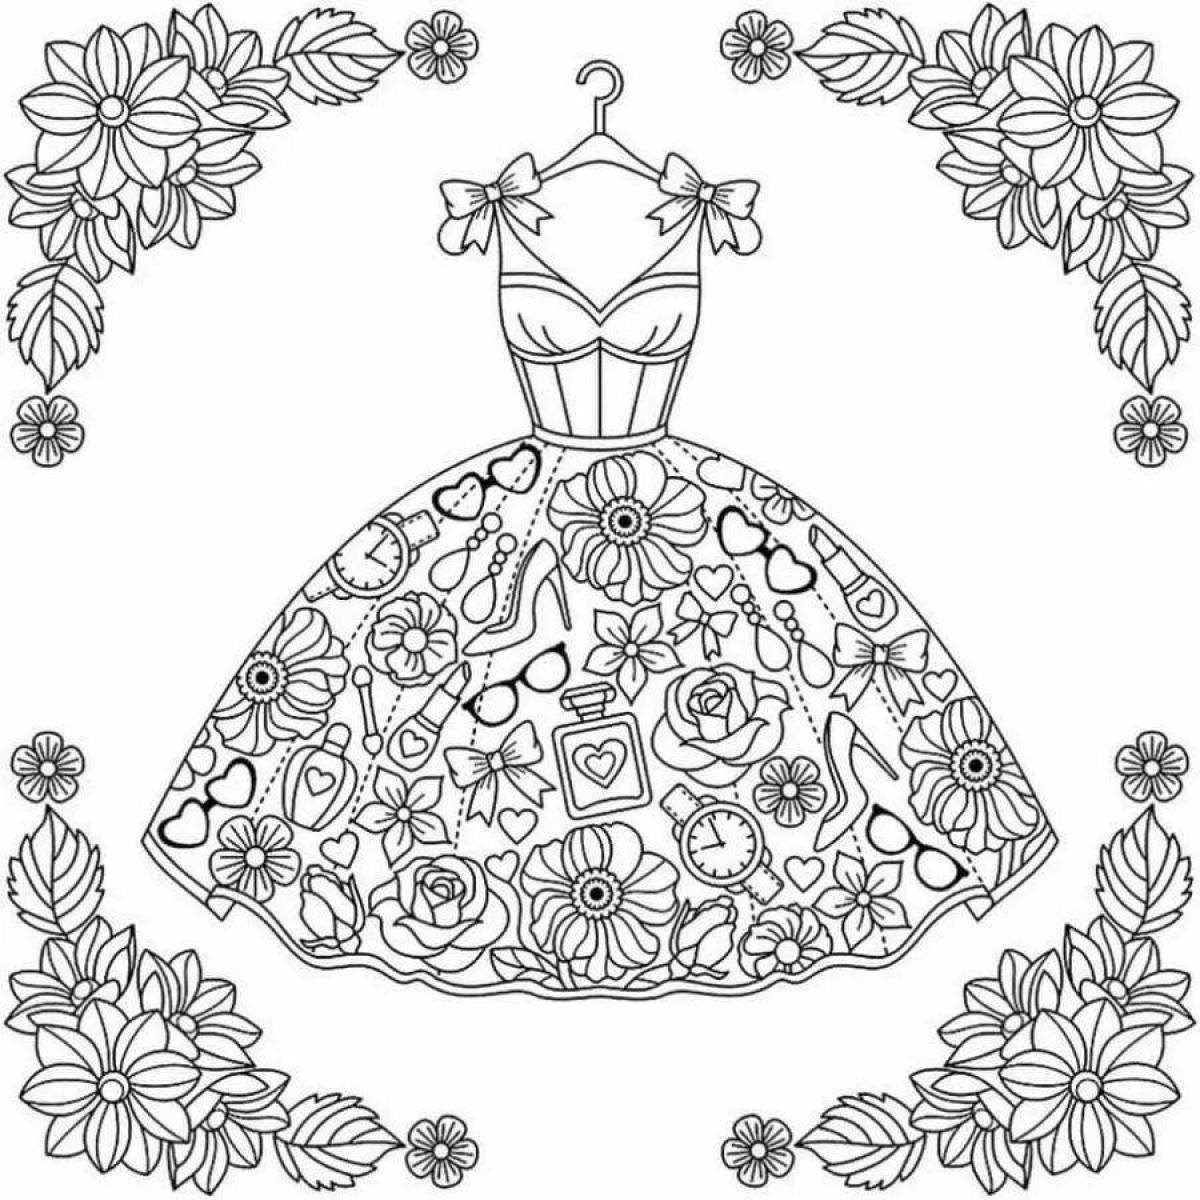 Coloring page with unique outfit